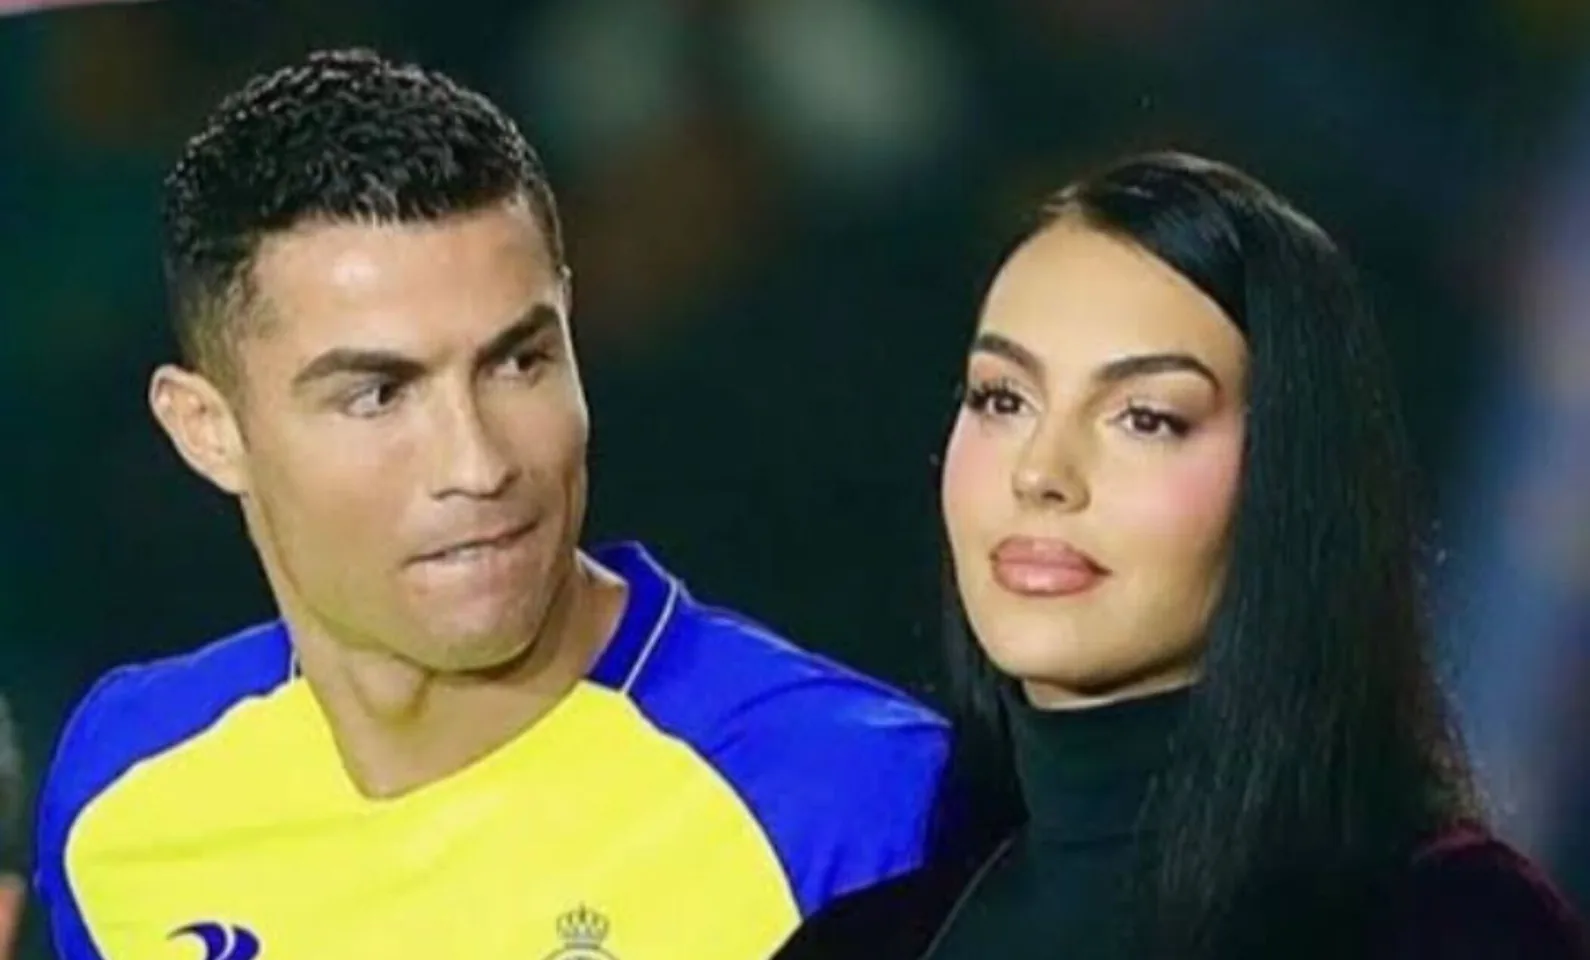 Saudi Arabia bends marriage law for Ronaldo and partner